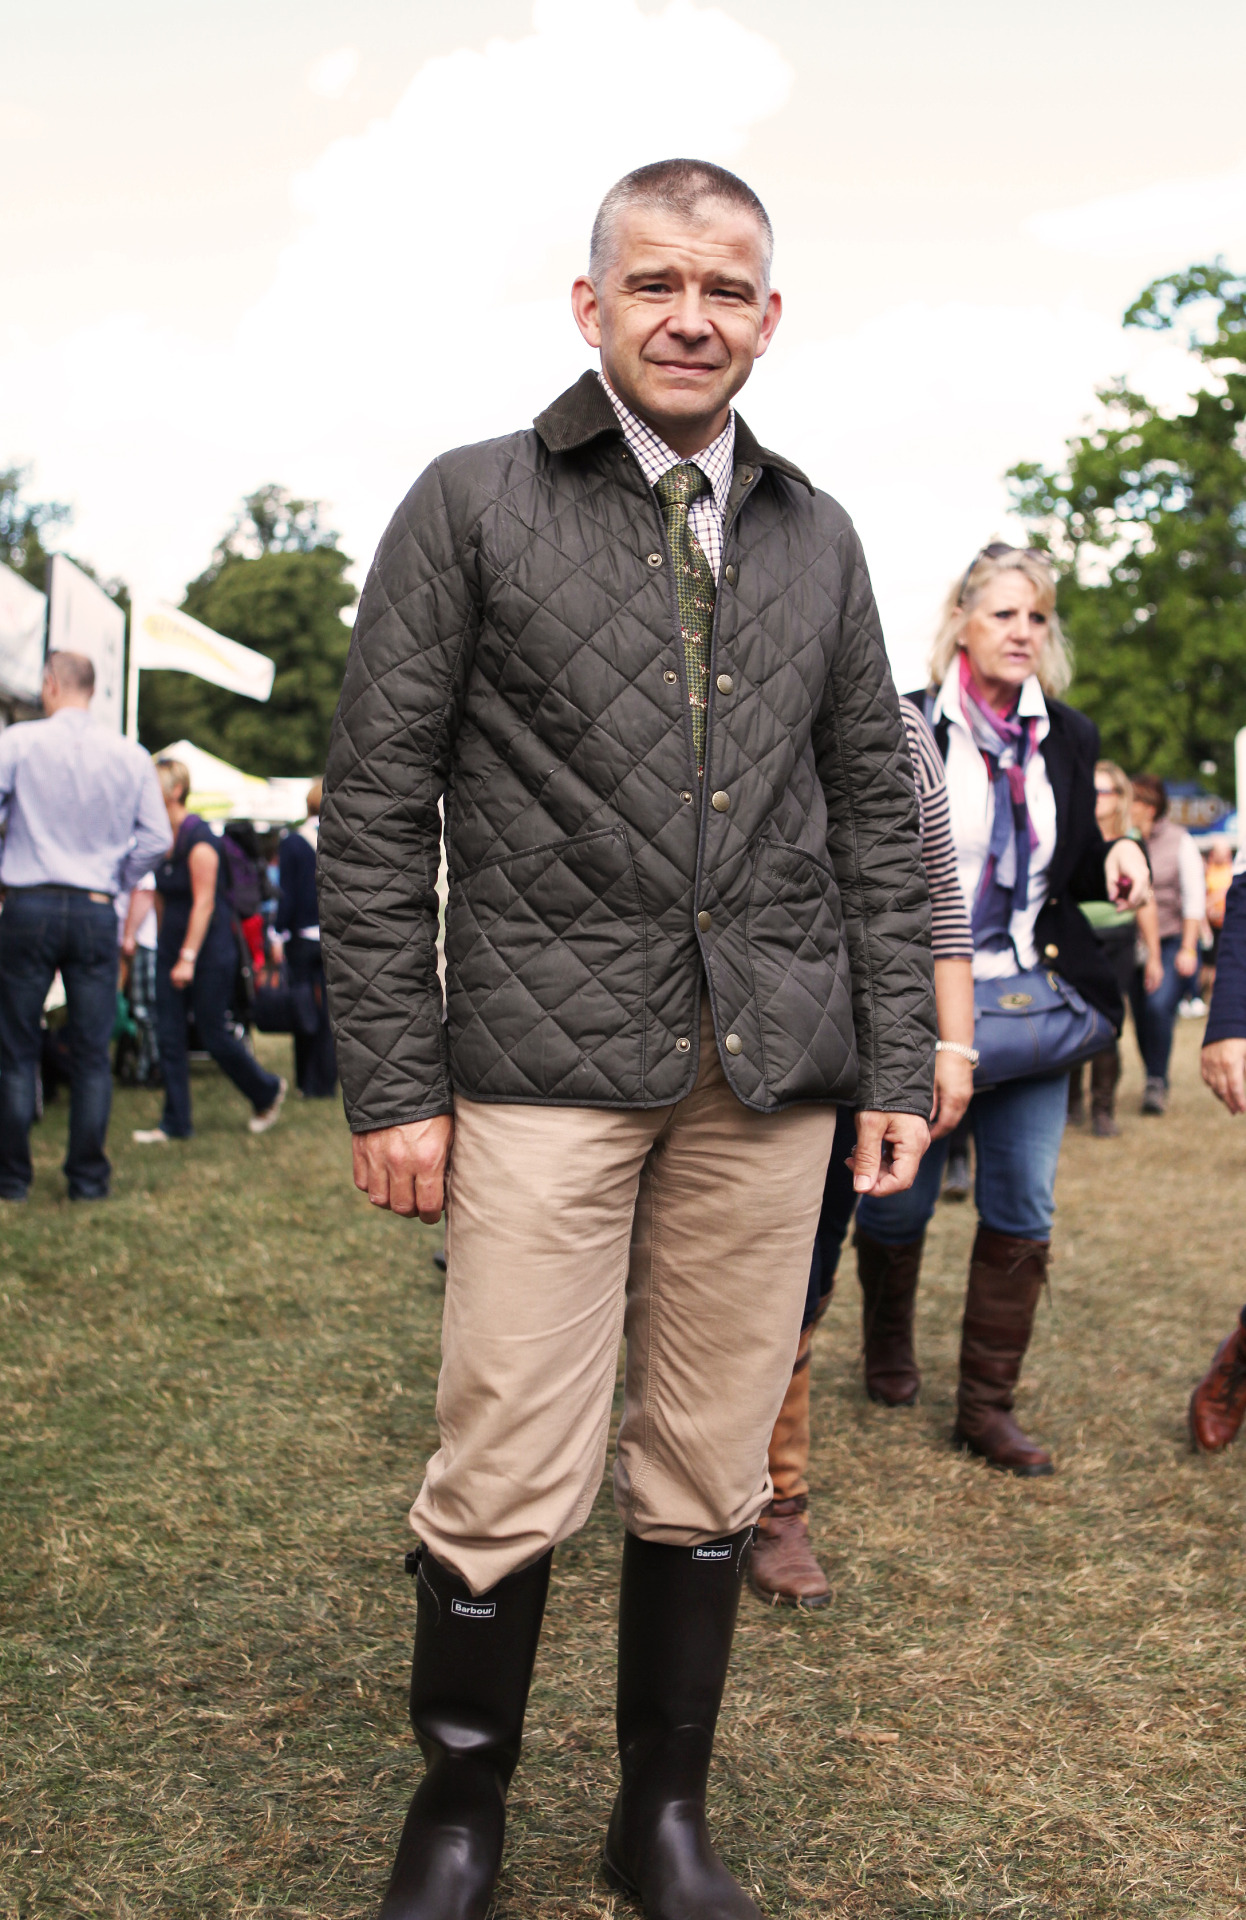 Barbour People — Here's Ian looking fab at Burghley Horse Trials in